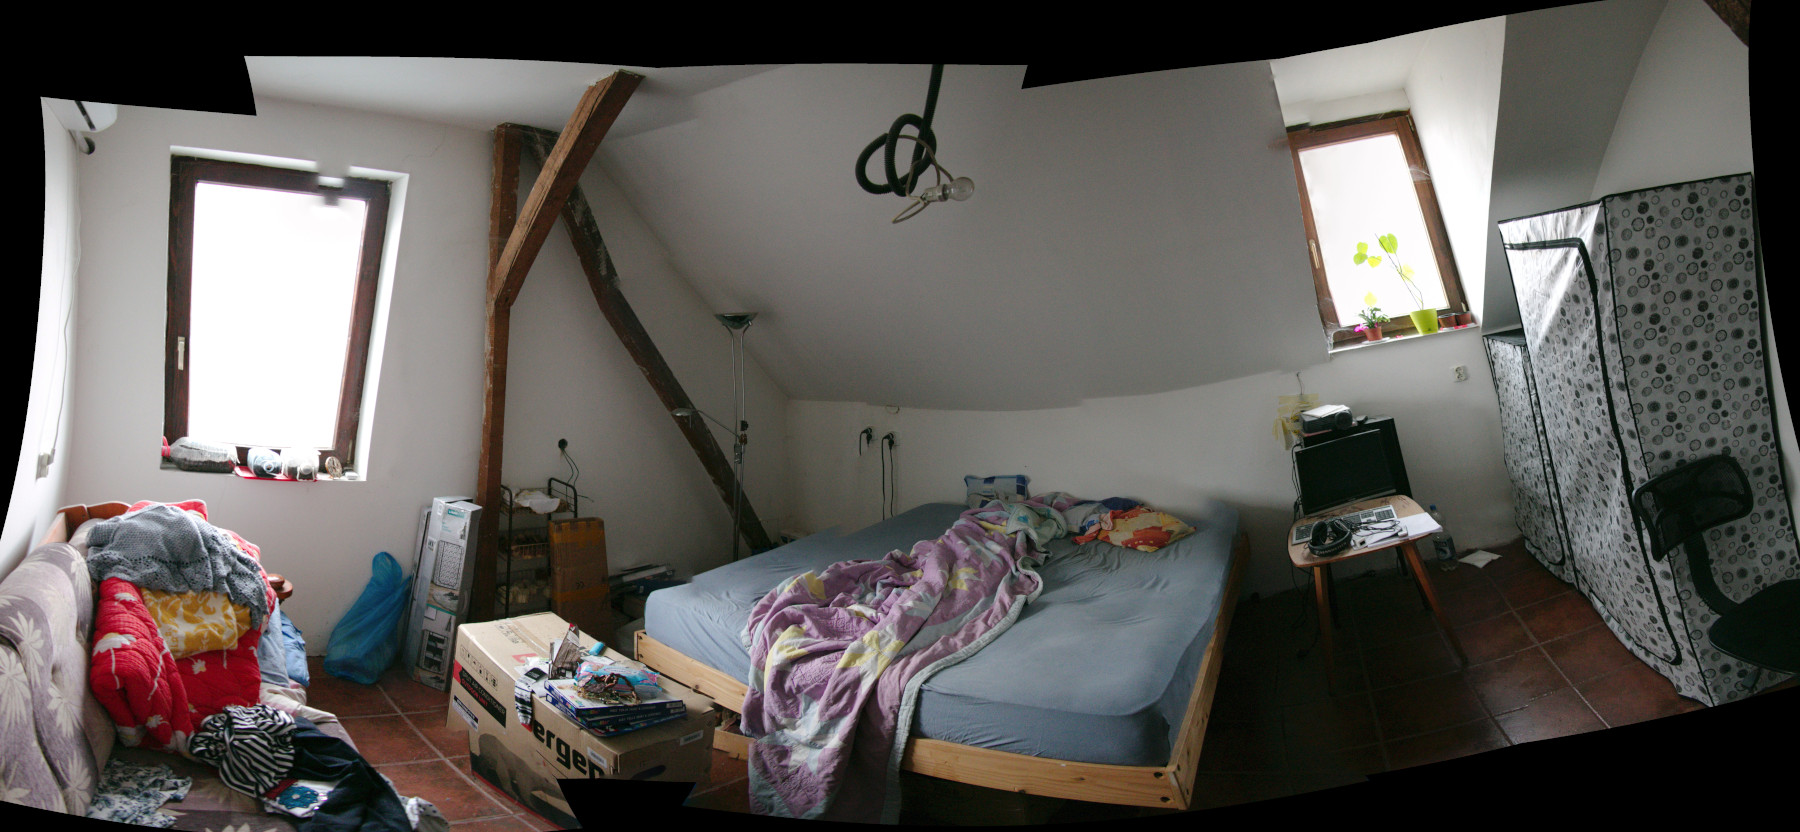 An autostitch of our bedroom upstairs.